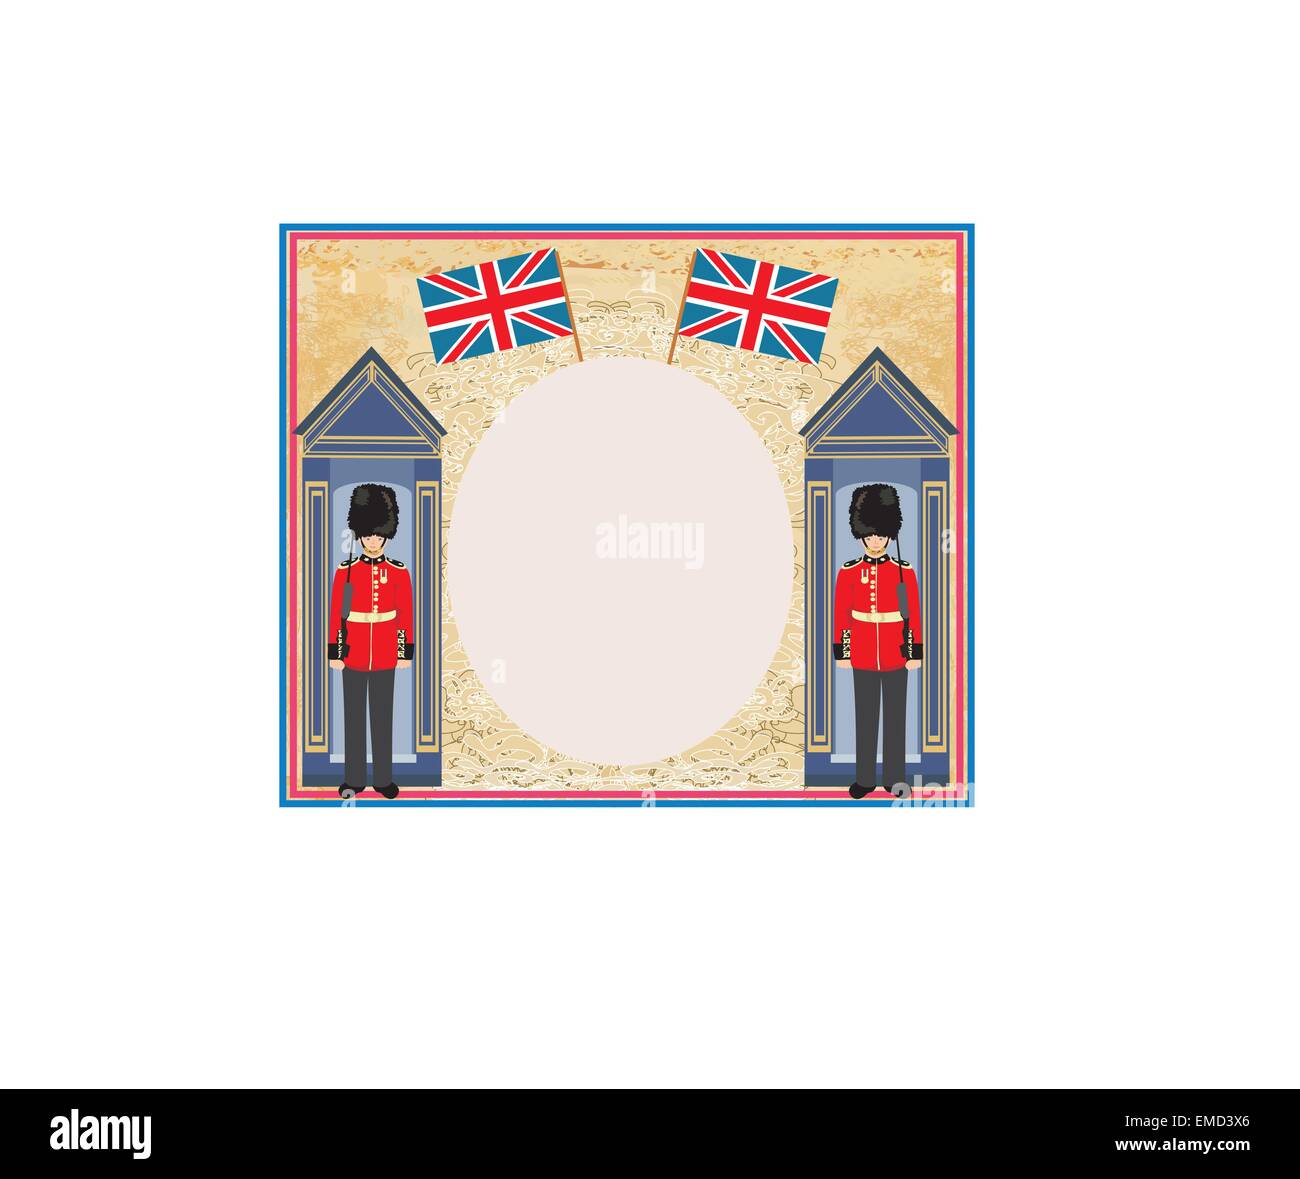 abstract background with flag england and Beefeater soldier Stock Vector